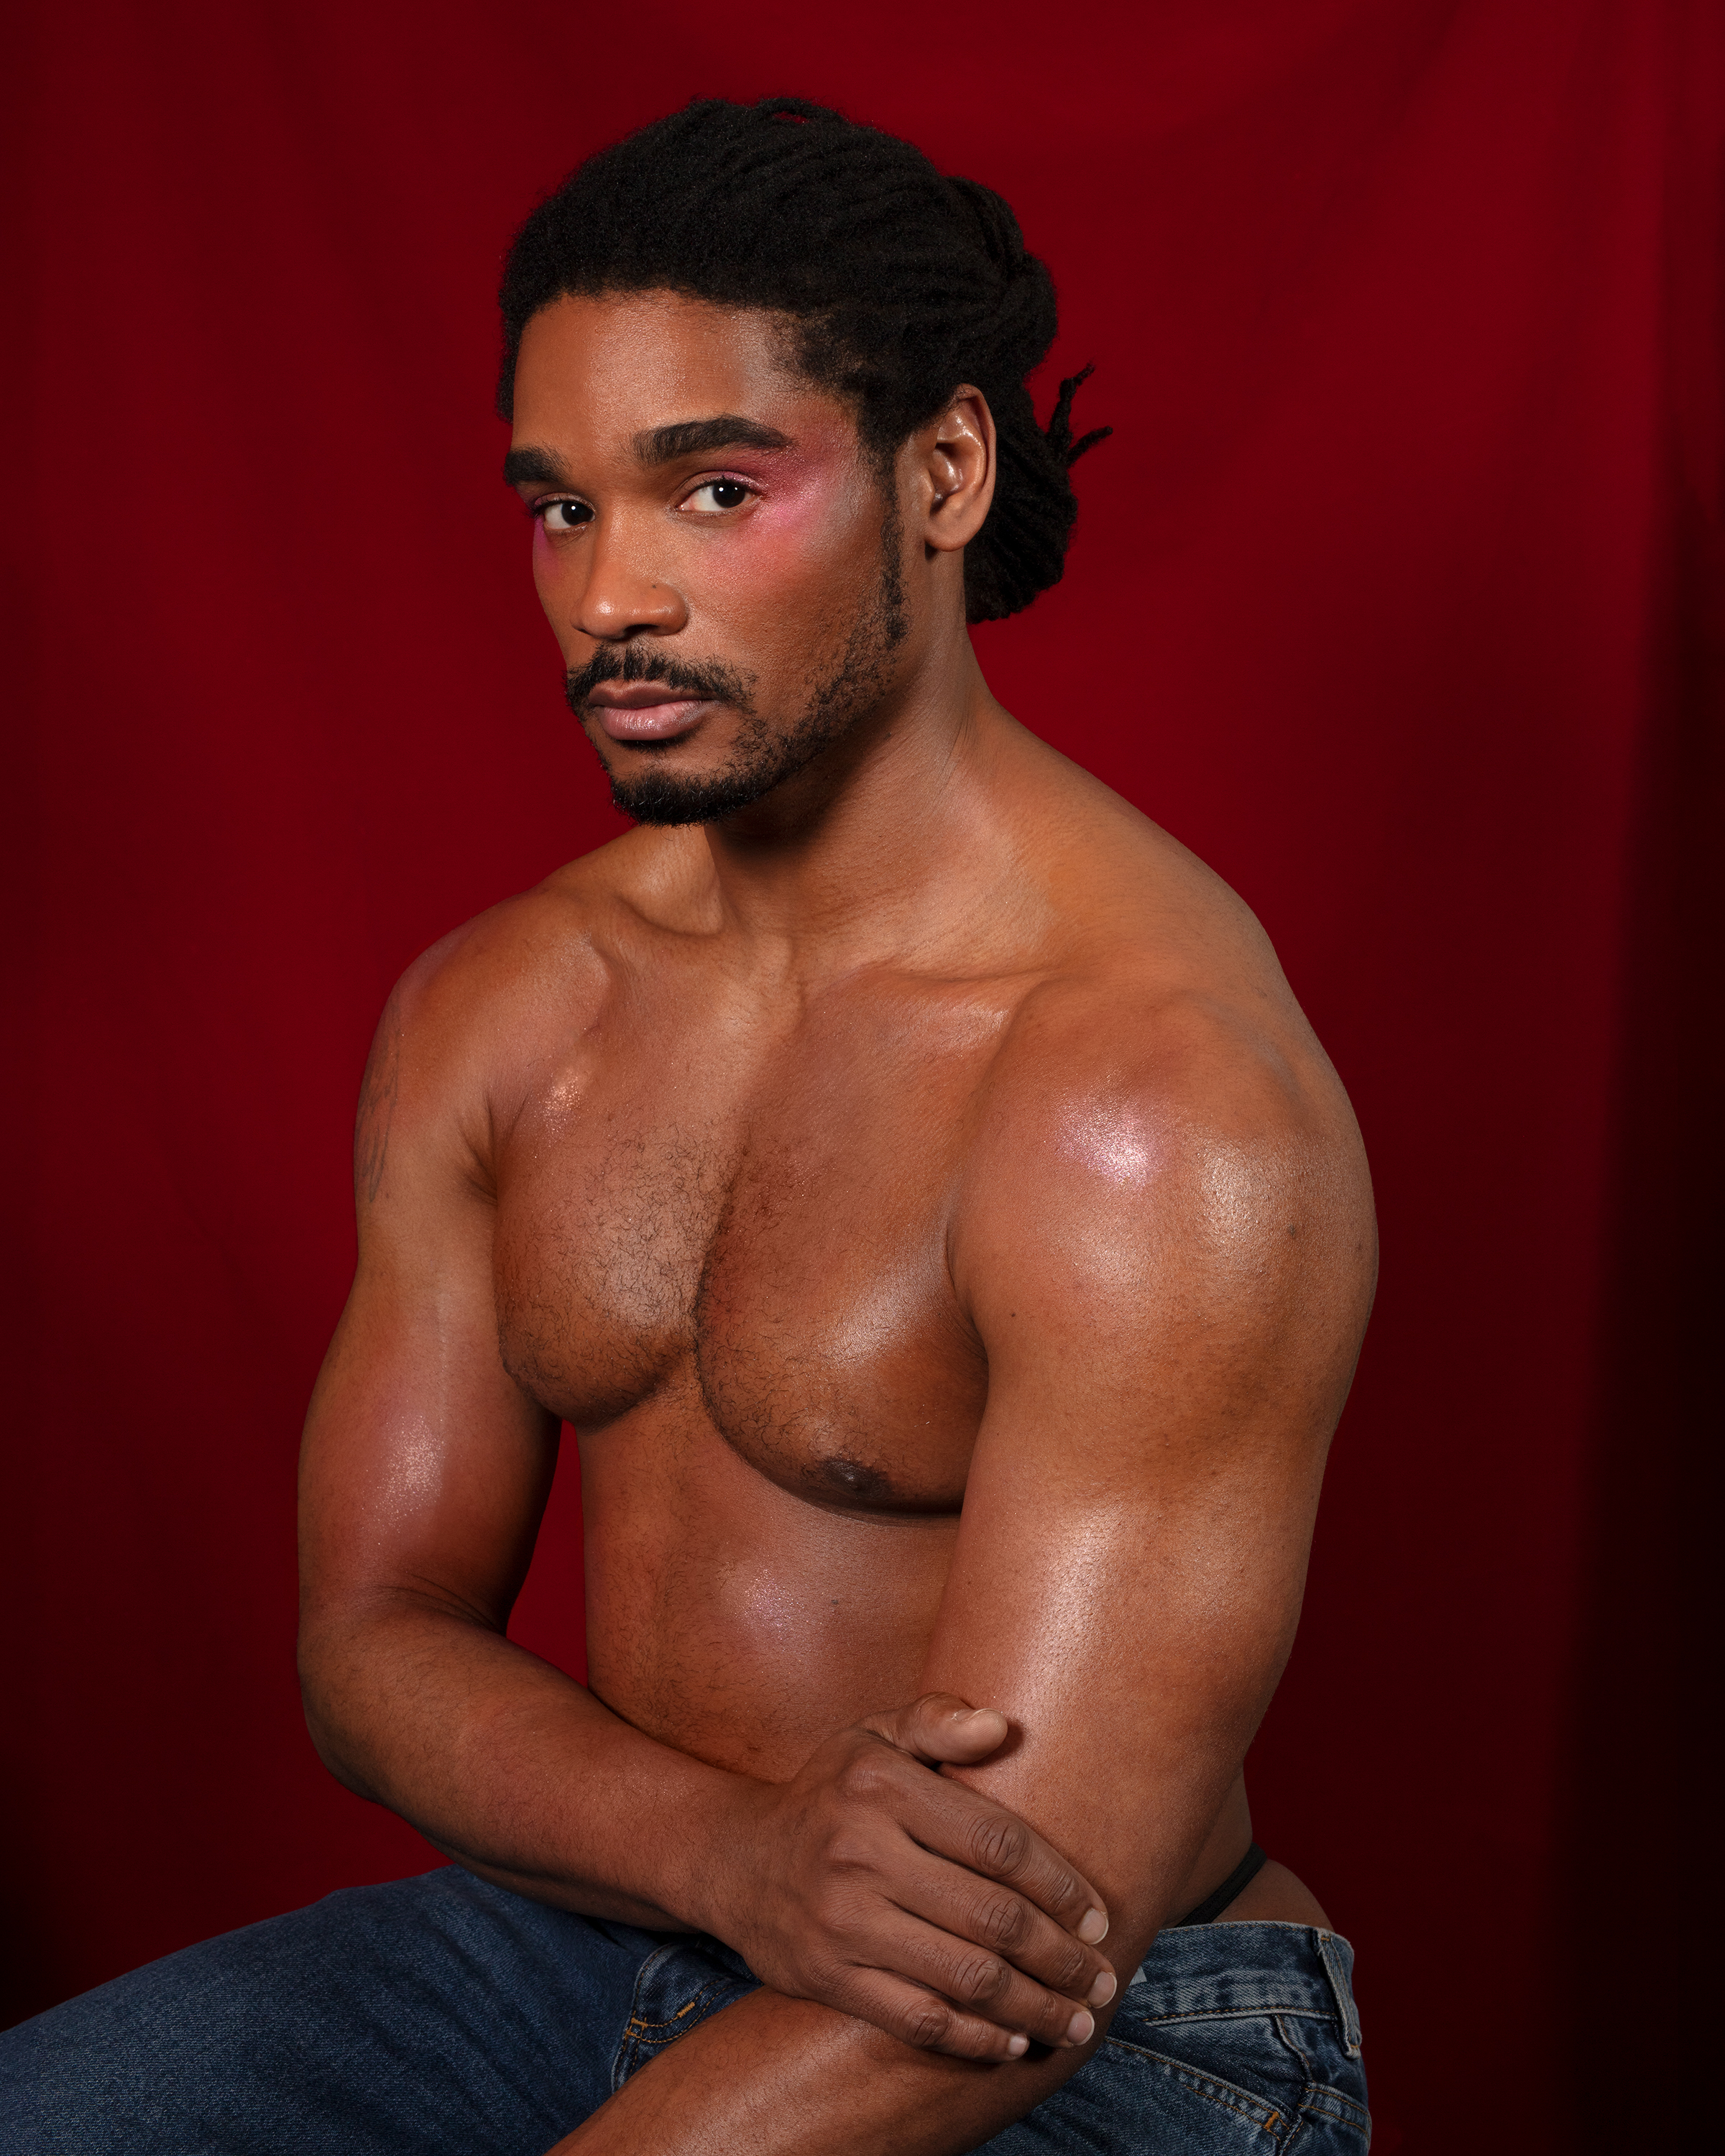 Waist up portrait of Khalyle shirtless with glowing skin looking at the camera against a red backdrop